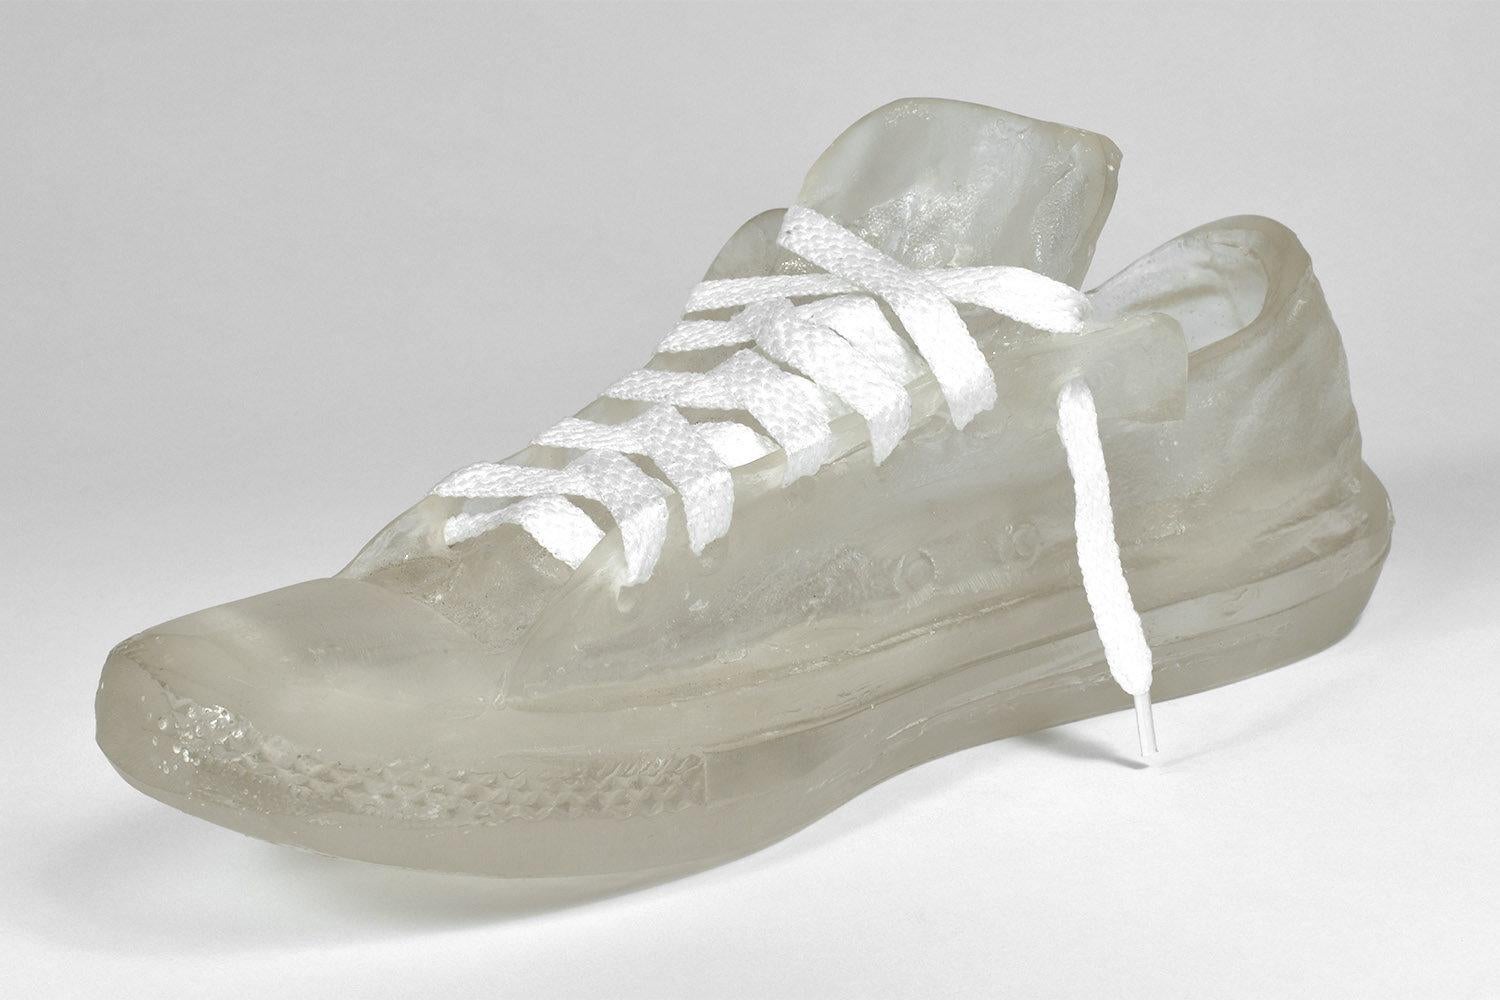 This acrylic tennis shoe was used as a serving dish for croquettes at select restaurants inspired by world-renowned chef José Andrés. The shoe was designed by Andrés and Sami Hayek, brother of film actress and producer Salma Hayek. Andrés is often